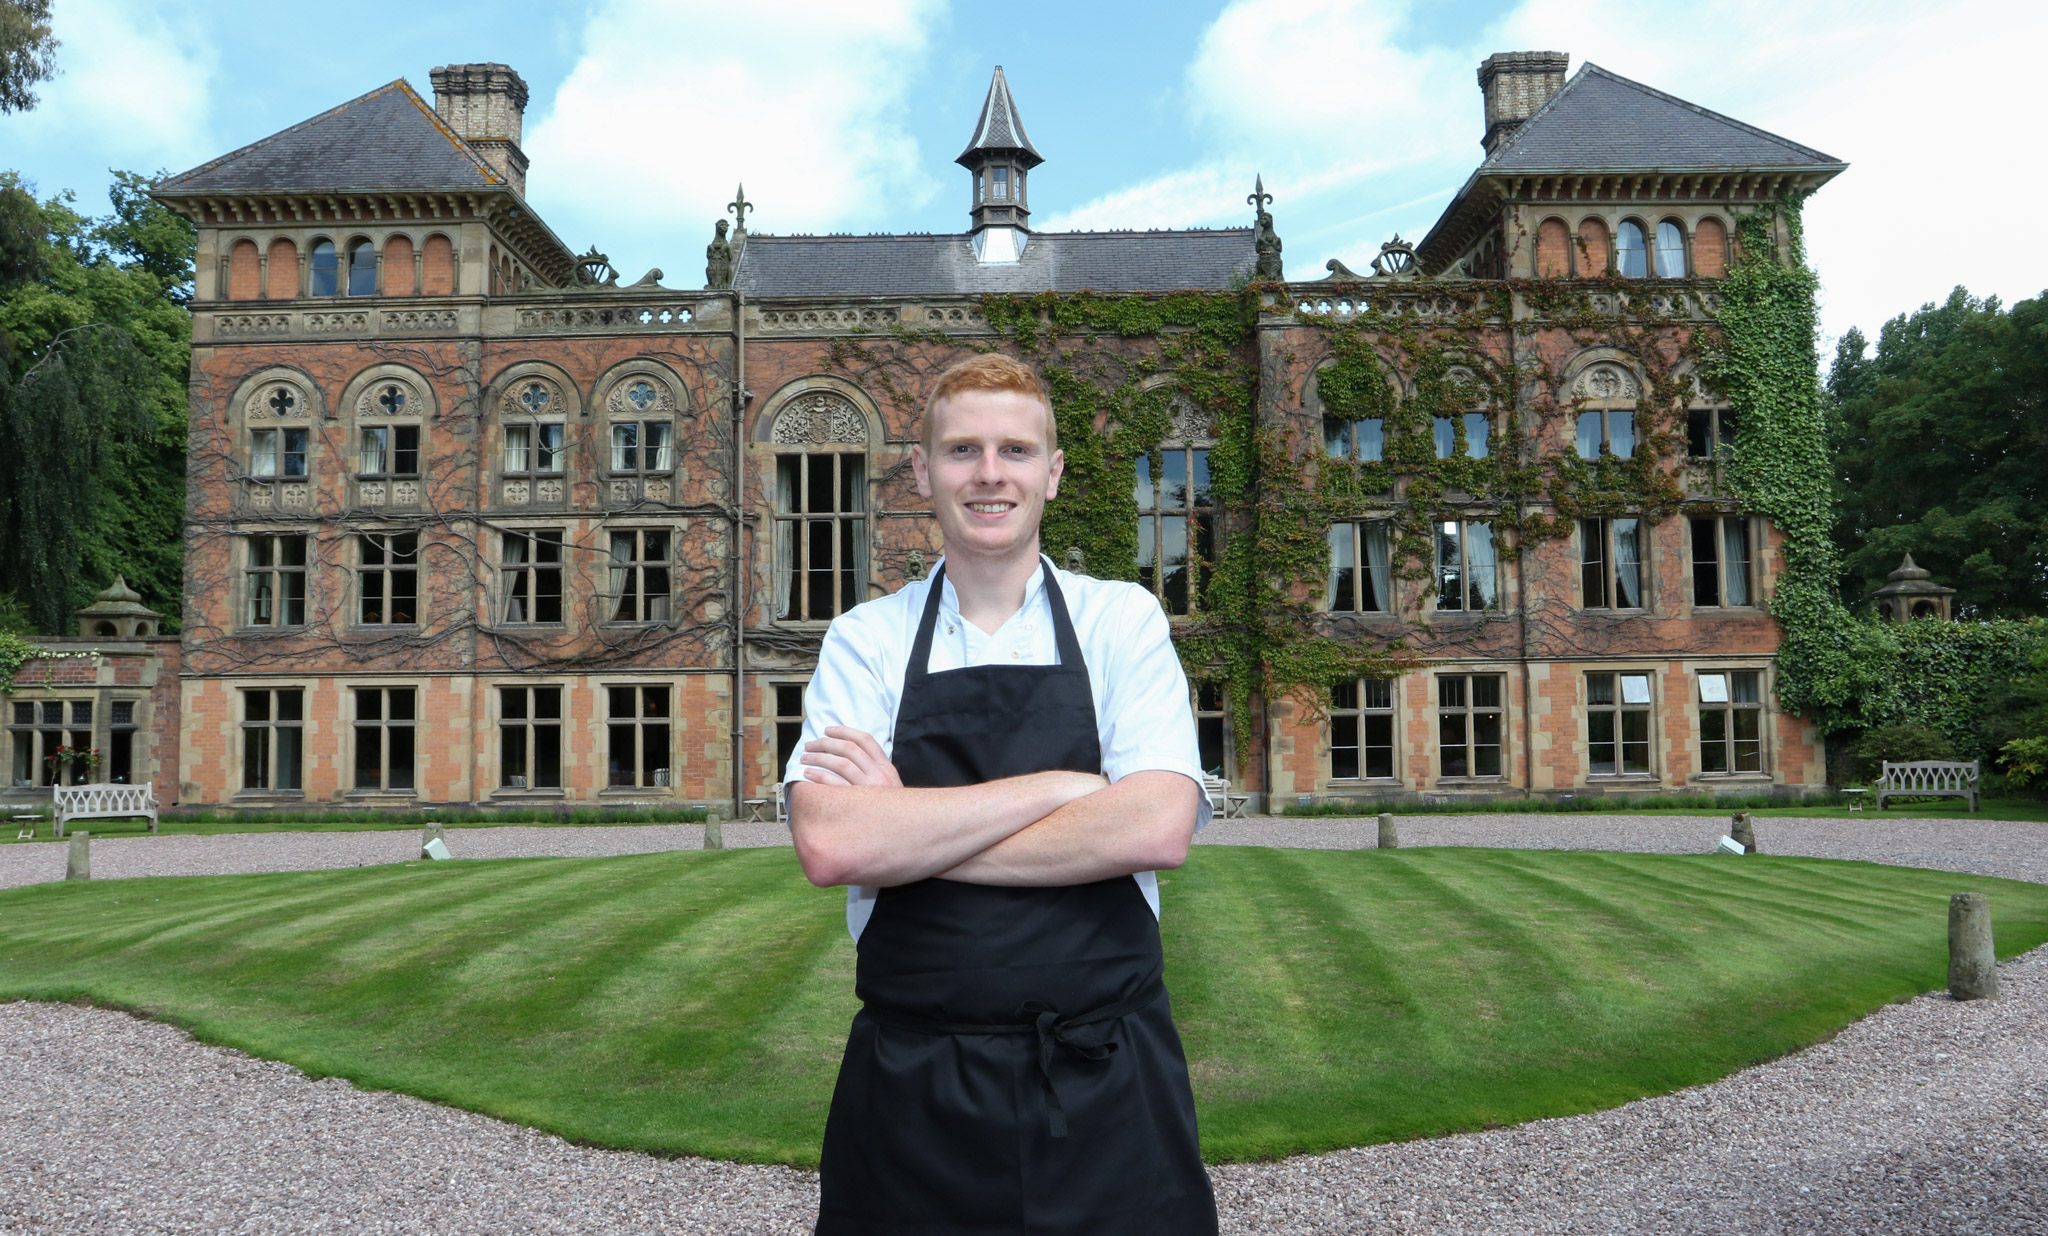 Head chef Scott who trained with TV star Tom Kerridge is cooking up new menu at Soughton Hall